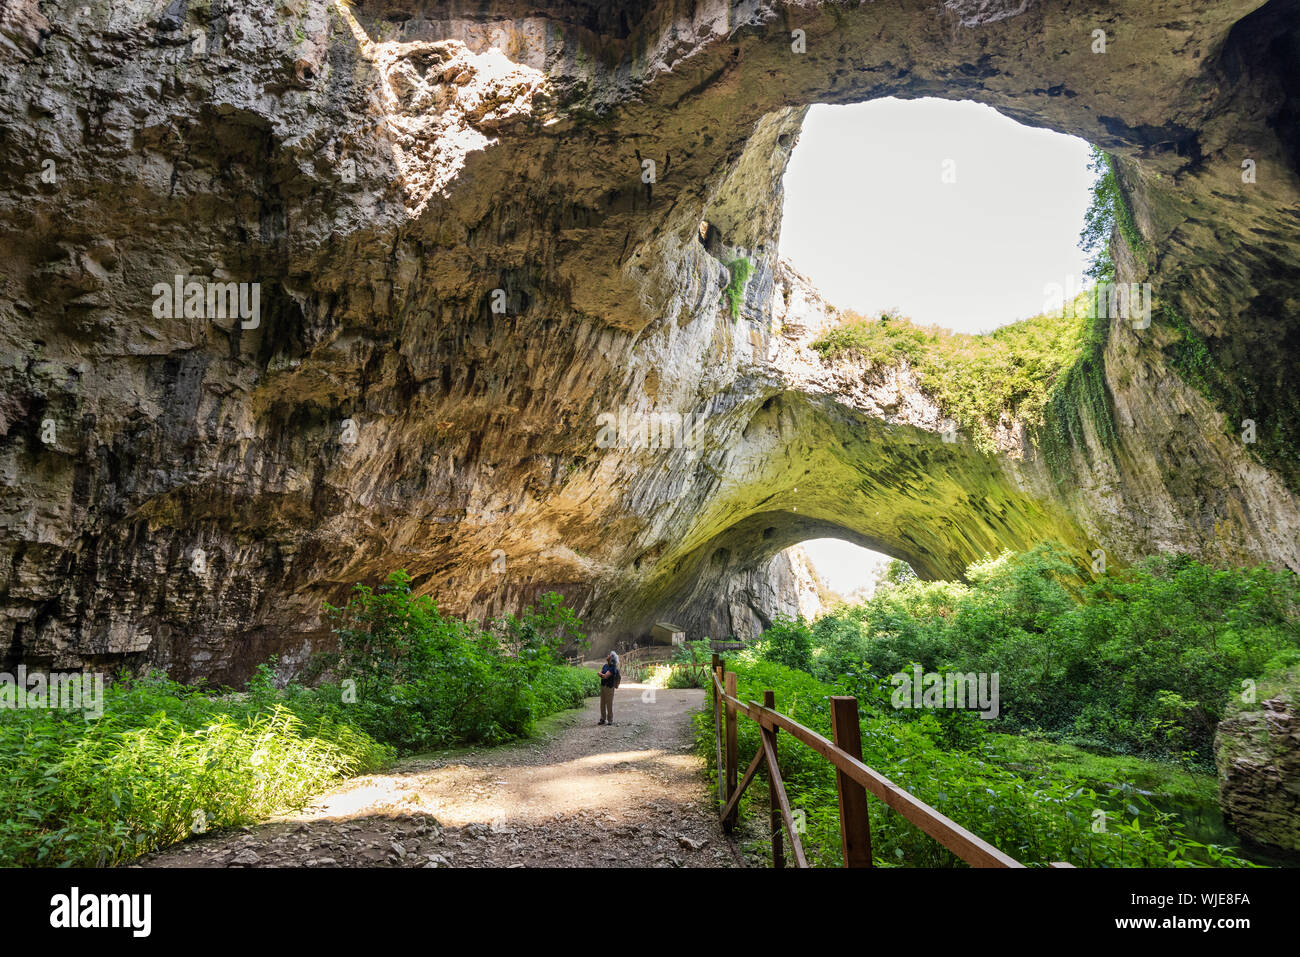 Devetashka cave is a large karst cave near Lovech. It has been occupied by Neanderthal and Homo sapiens for thousands of years.  Bulgaria Stock Photo